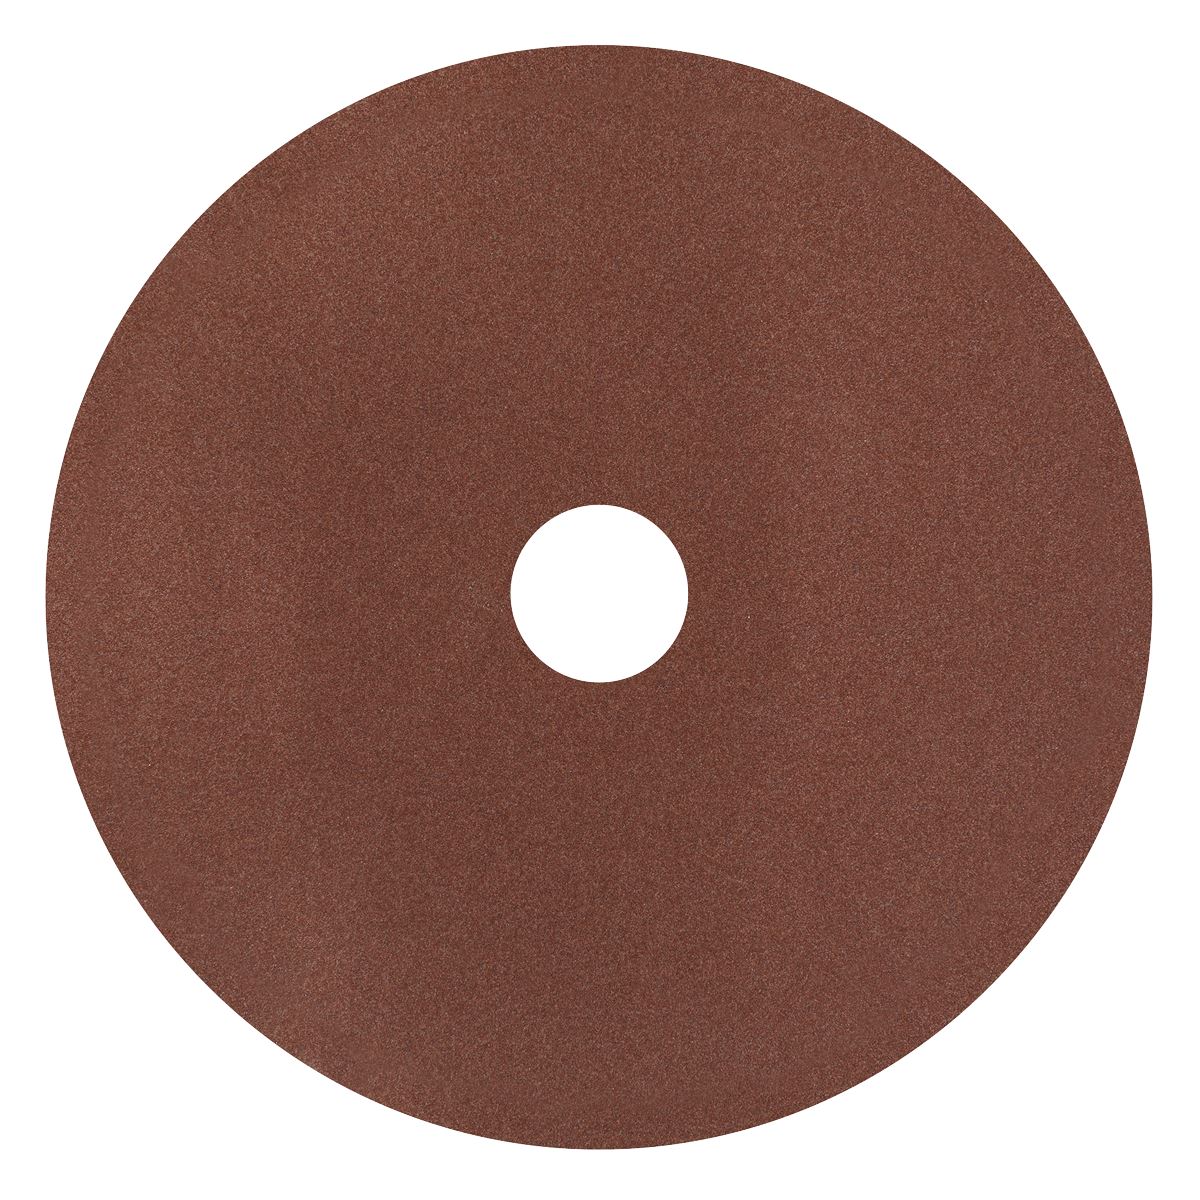 Worksafe by Sealey Fibre Backed Disc Ø115mm - 120Grit Pack of 25